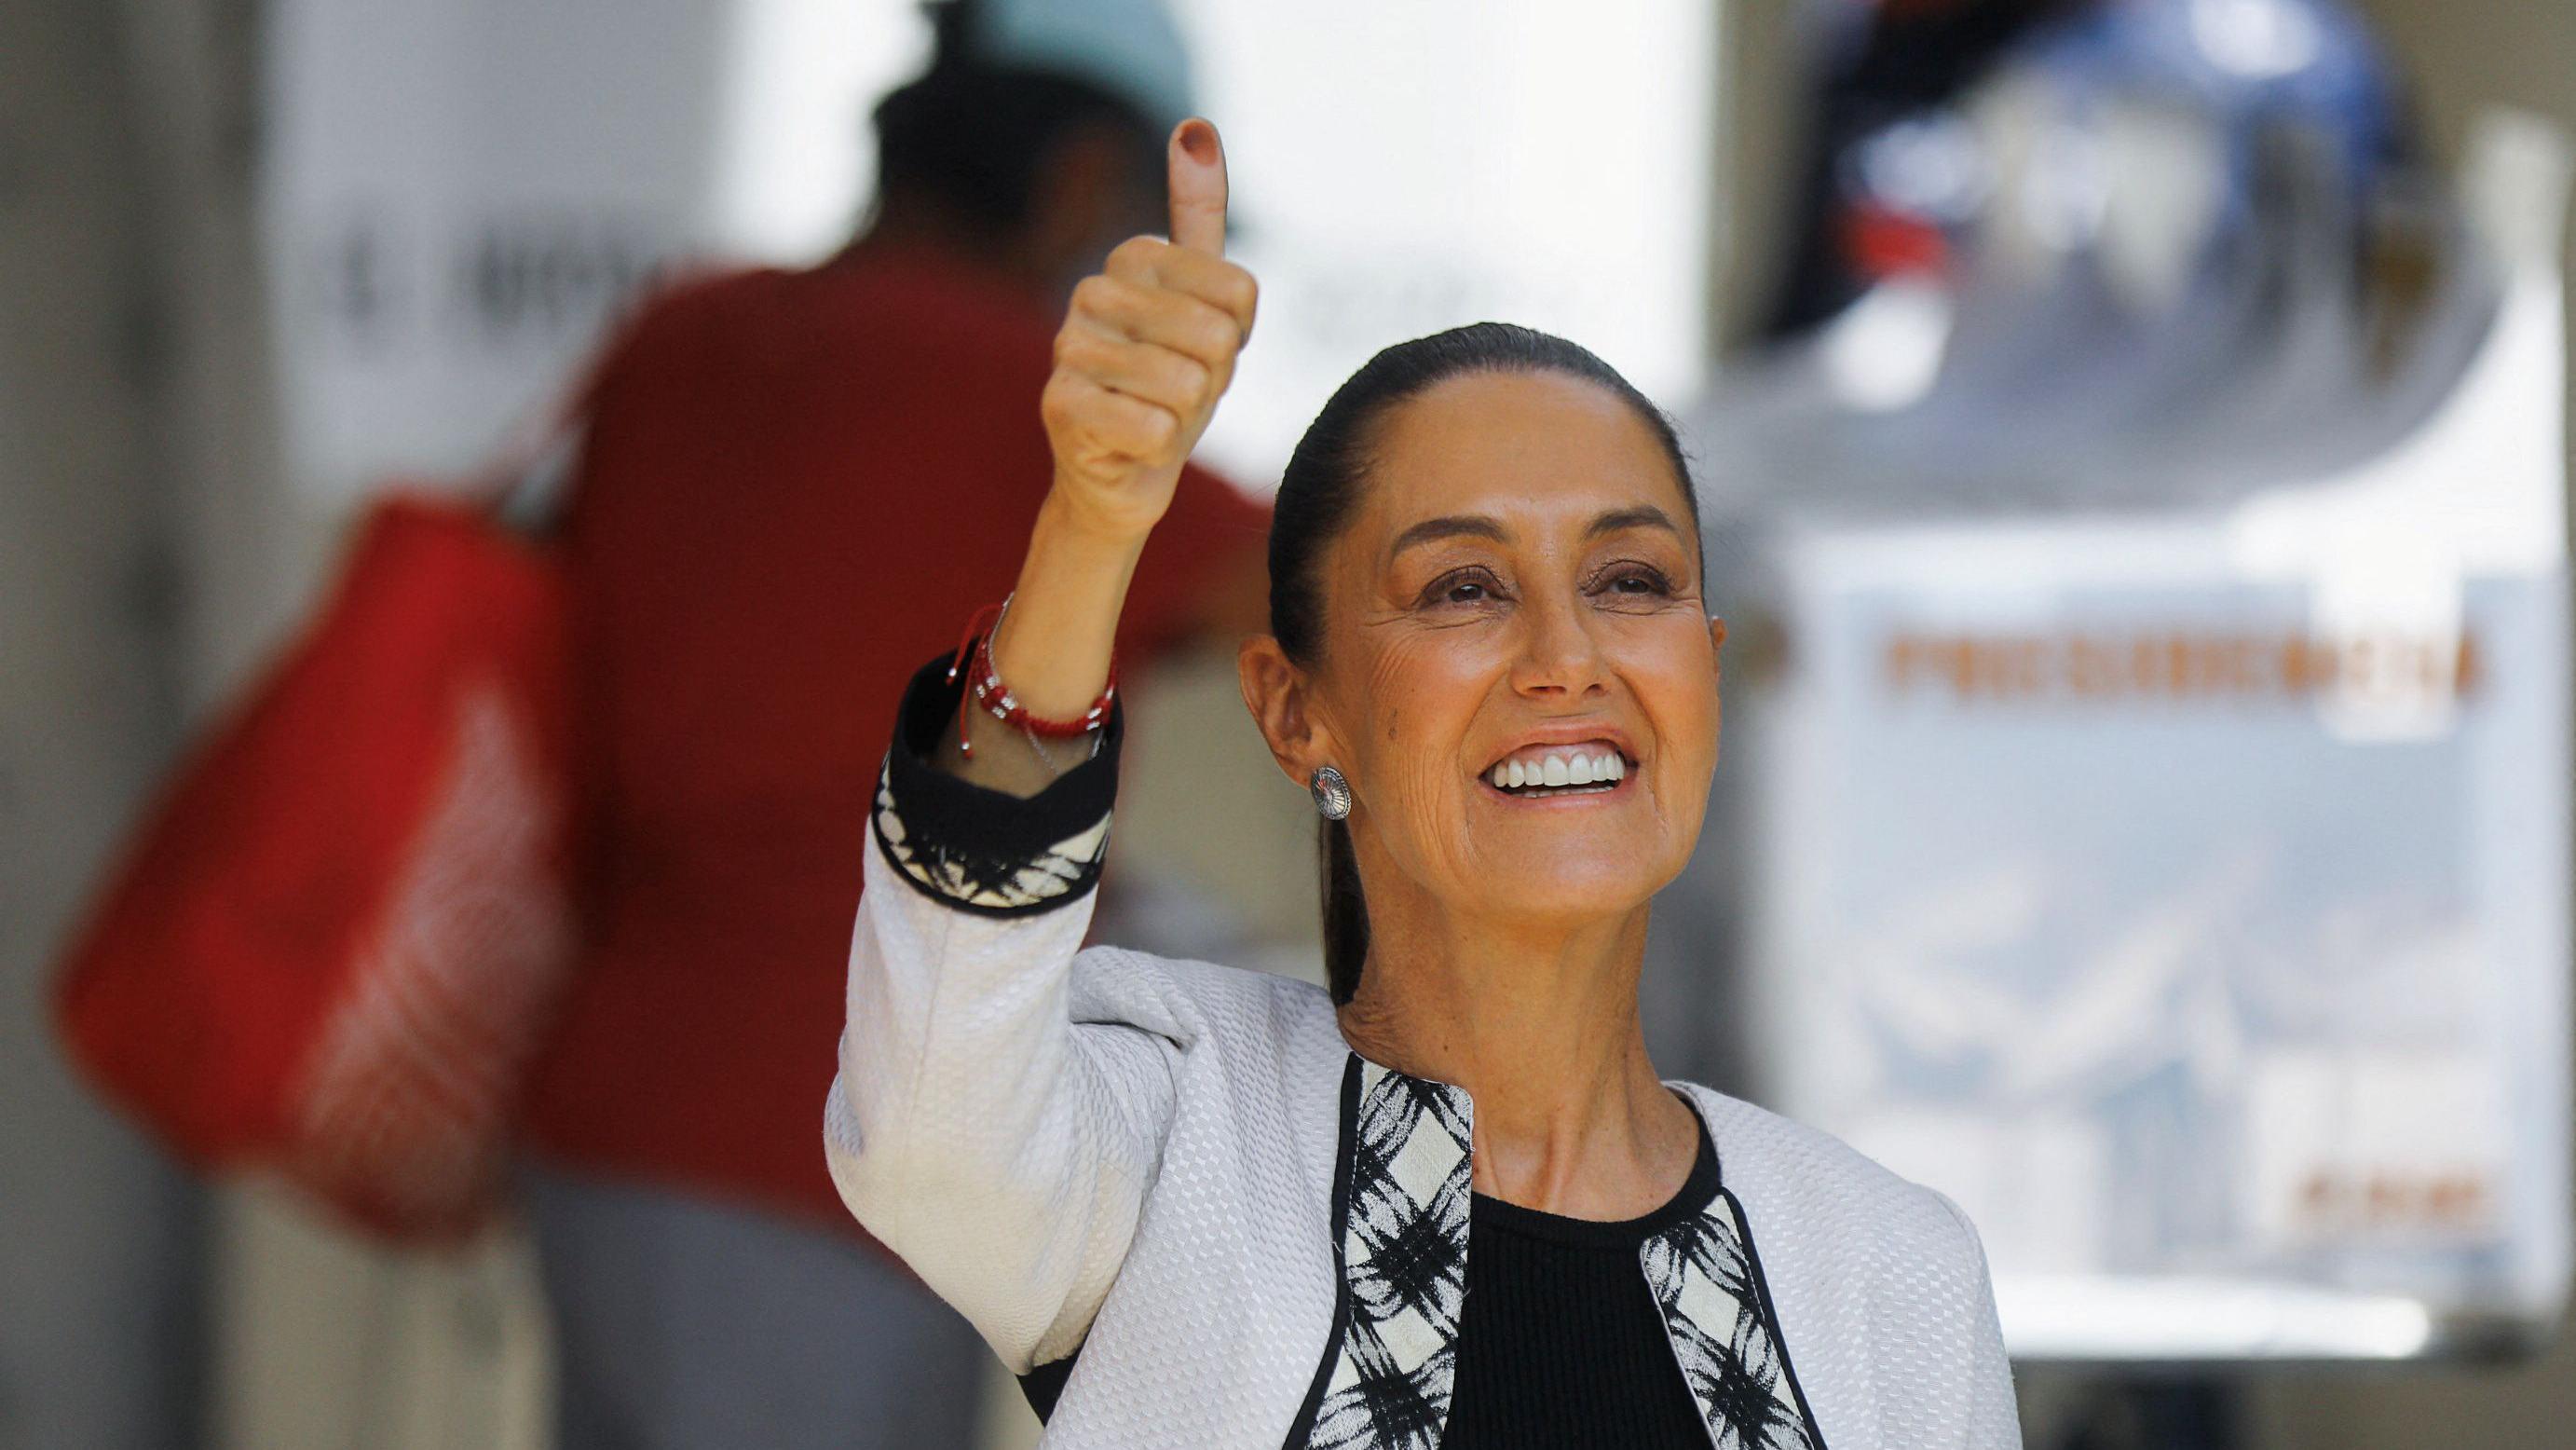 Mexicos first female president breaks political glass ceiling